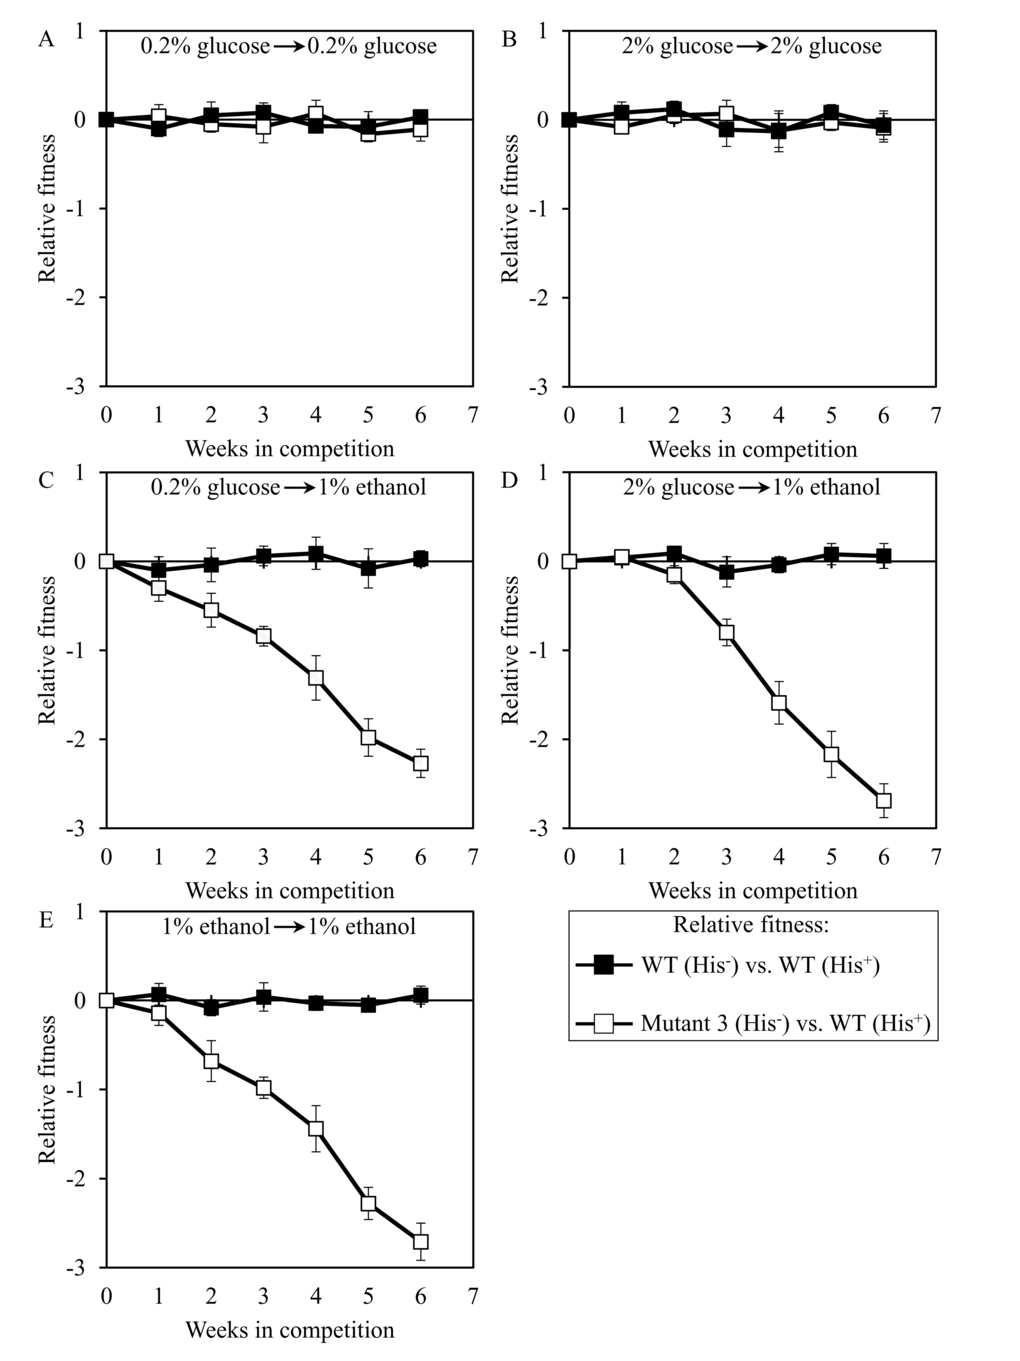 Dominant polygenic trait extending longevity of the long-lived yeast mutant 3 decreases its relative fitness in medium initially containing 1% ethanol. The WT strains BY4742 (His-) and BY4739 (His+, but otherwise isogenic to BY4742) were cultured separately in the complete YP medium containing 0.2% glucose, 2% glucose or 1% ethanol glucose until mid-exponential phase. Another pair of strains whose relative fitness was measured, namely the long-lived mutant strain 3 (His-; selected during lasting exposure of BY4742 to LCA) and the WT strain BY4739 (His+), was also cultured separately in YP medium containing 0.2% glucose 2% glucose or 1% ethanol glucose until mid-exponential phase. Cells of the His+ strain were mixed with the same number of cells of the His- strain and then co-cultured for 7 days in liquid YP medium initially containing different carbon sources. Cells of the His- and His+ strains pre-cultured separately on 0.2% glucose were subjected to direct fitness competition by being cultured together on 0.2% glucose (A) or 1% ethanol (C). Cells of the His- and His+ strains pre-cultured separately on 2% glucose were subjected to direct fitness competition by being cultured together on 2% glucose (B) or 1% ethanol (D). Cells of the His- and His+ strains pre-cultured separately on 1% ethanol were subjected to direct fitness competition by being cultured together on 1% ethanol (E). After culturing the cell mixture for 7 days, an aliquot of cell suspension was used to measure the relative fitness of the His+ strain in a direct competition with the His- strain (as described in ″Materials and Methods″). The direct fitness competition step of culturing a cell mixture for 7 days in liquid YP medium was repeated 6 times.